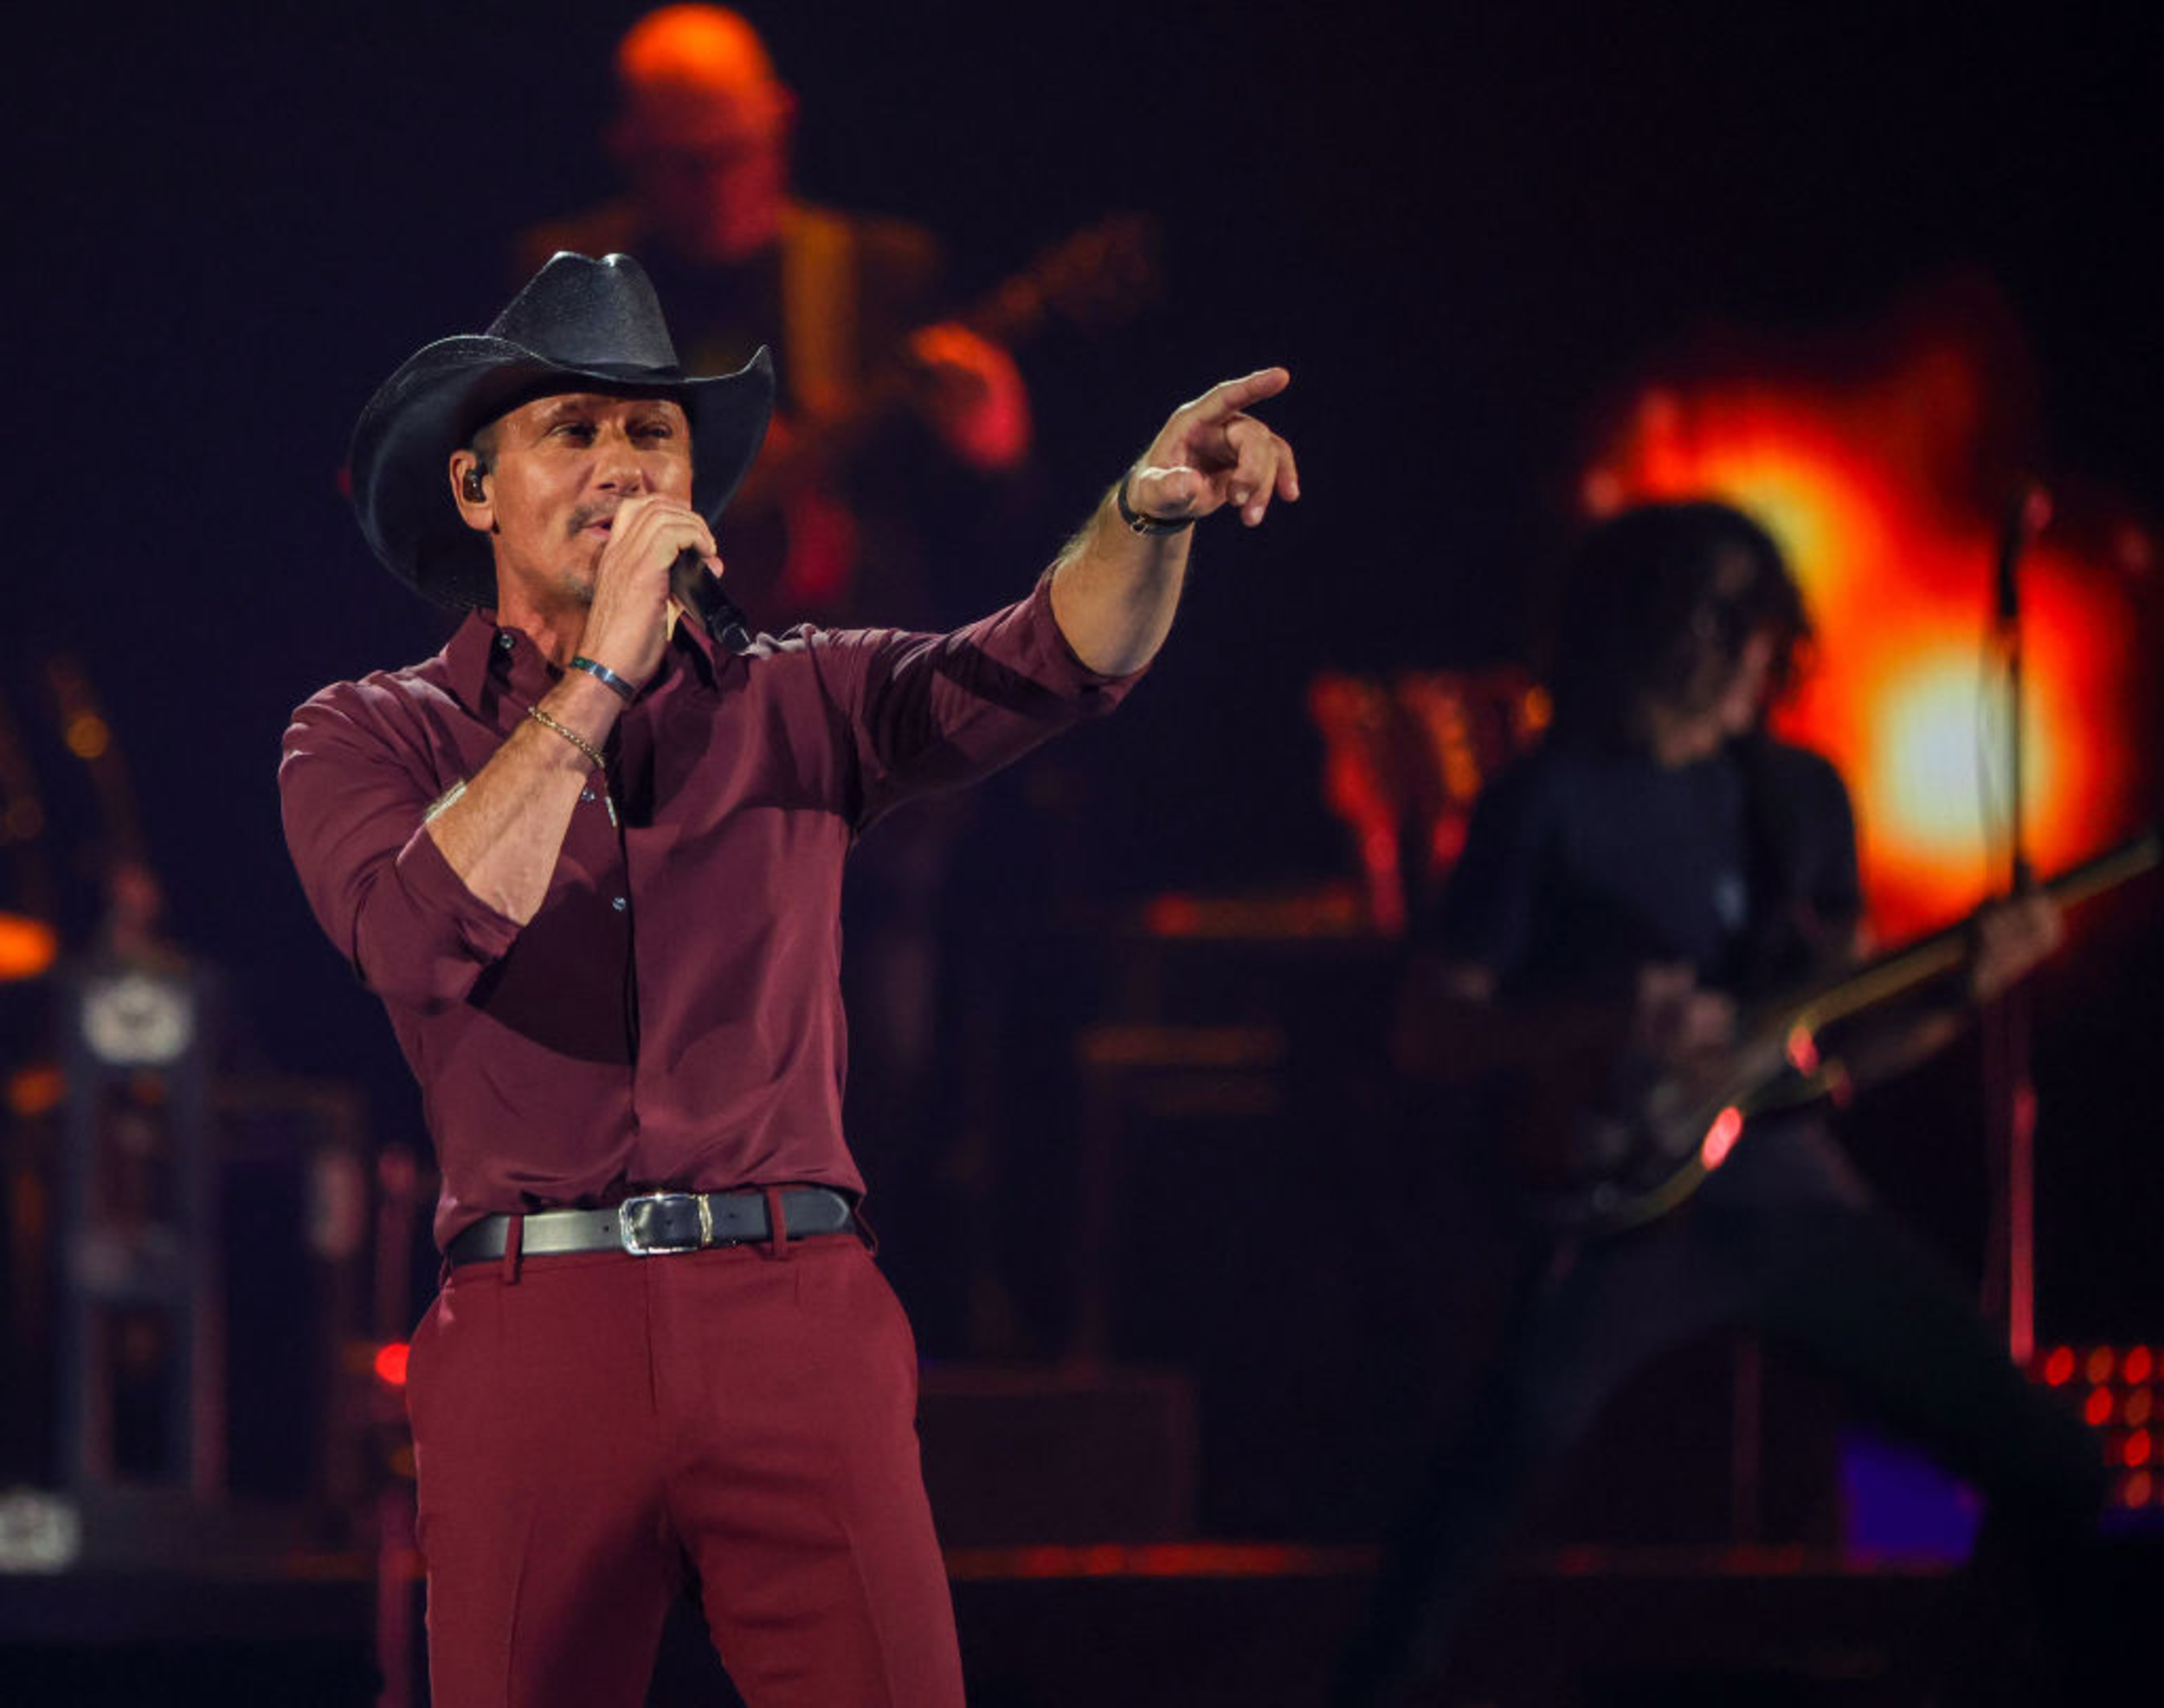 <p>In support of his latest album <em>Standing Room Only,</em> country legend Tim McGraw is bringing his talent to the stage. The three-time Grammy winner’s tour will begin on March 14th in Jacksonville and end on June 27th in Phoenix. </p><p>You may also like: <a href='https://www.yardbarker.com/entertainment/articles/the_20_funniest_raunchy_comedies_030424/s1__39186165'>Box office gross: The 20 funniest raunchy comedies</a></p>